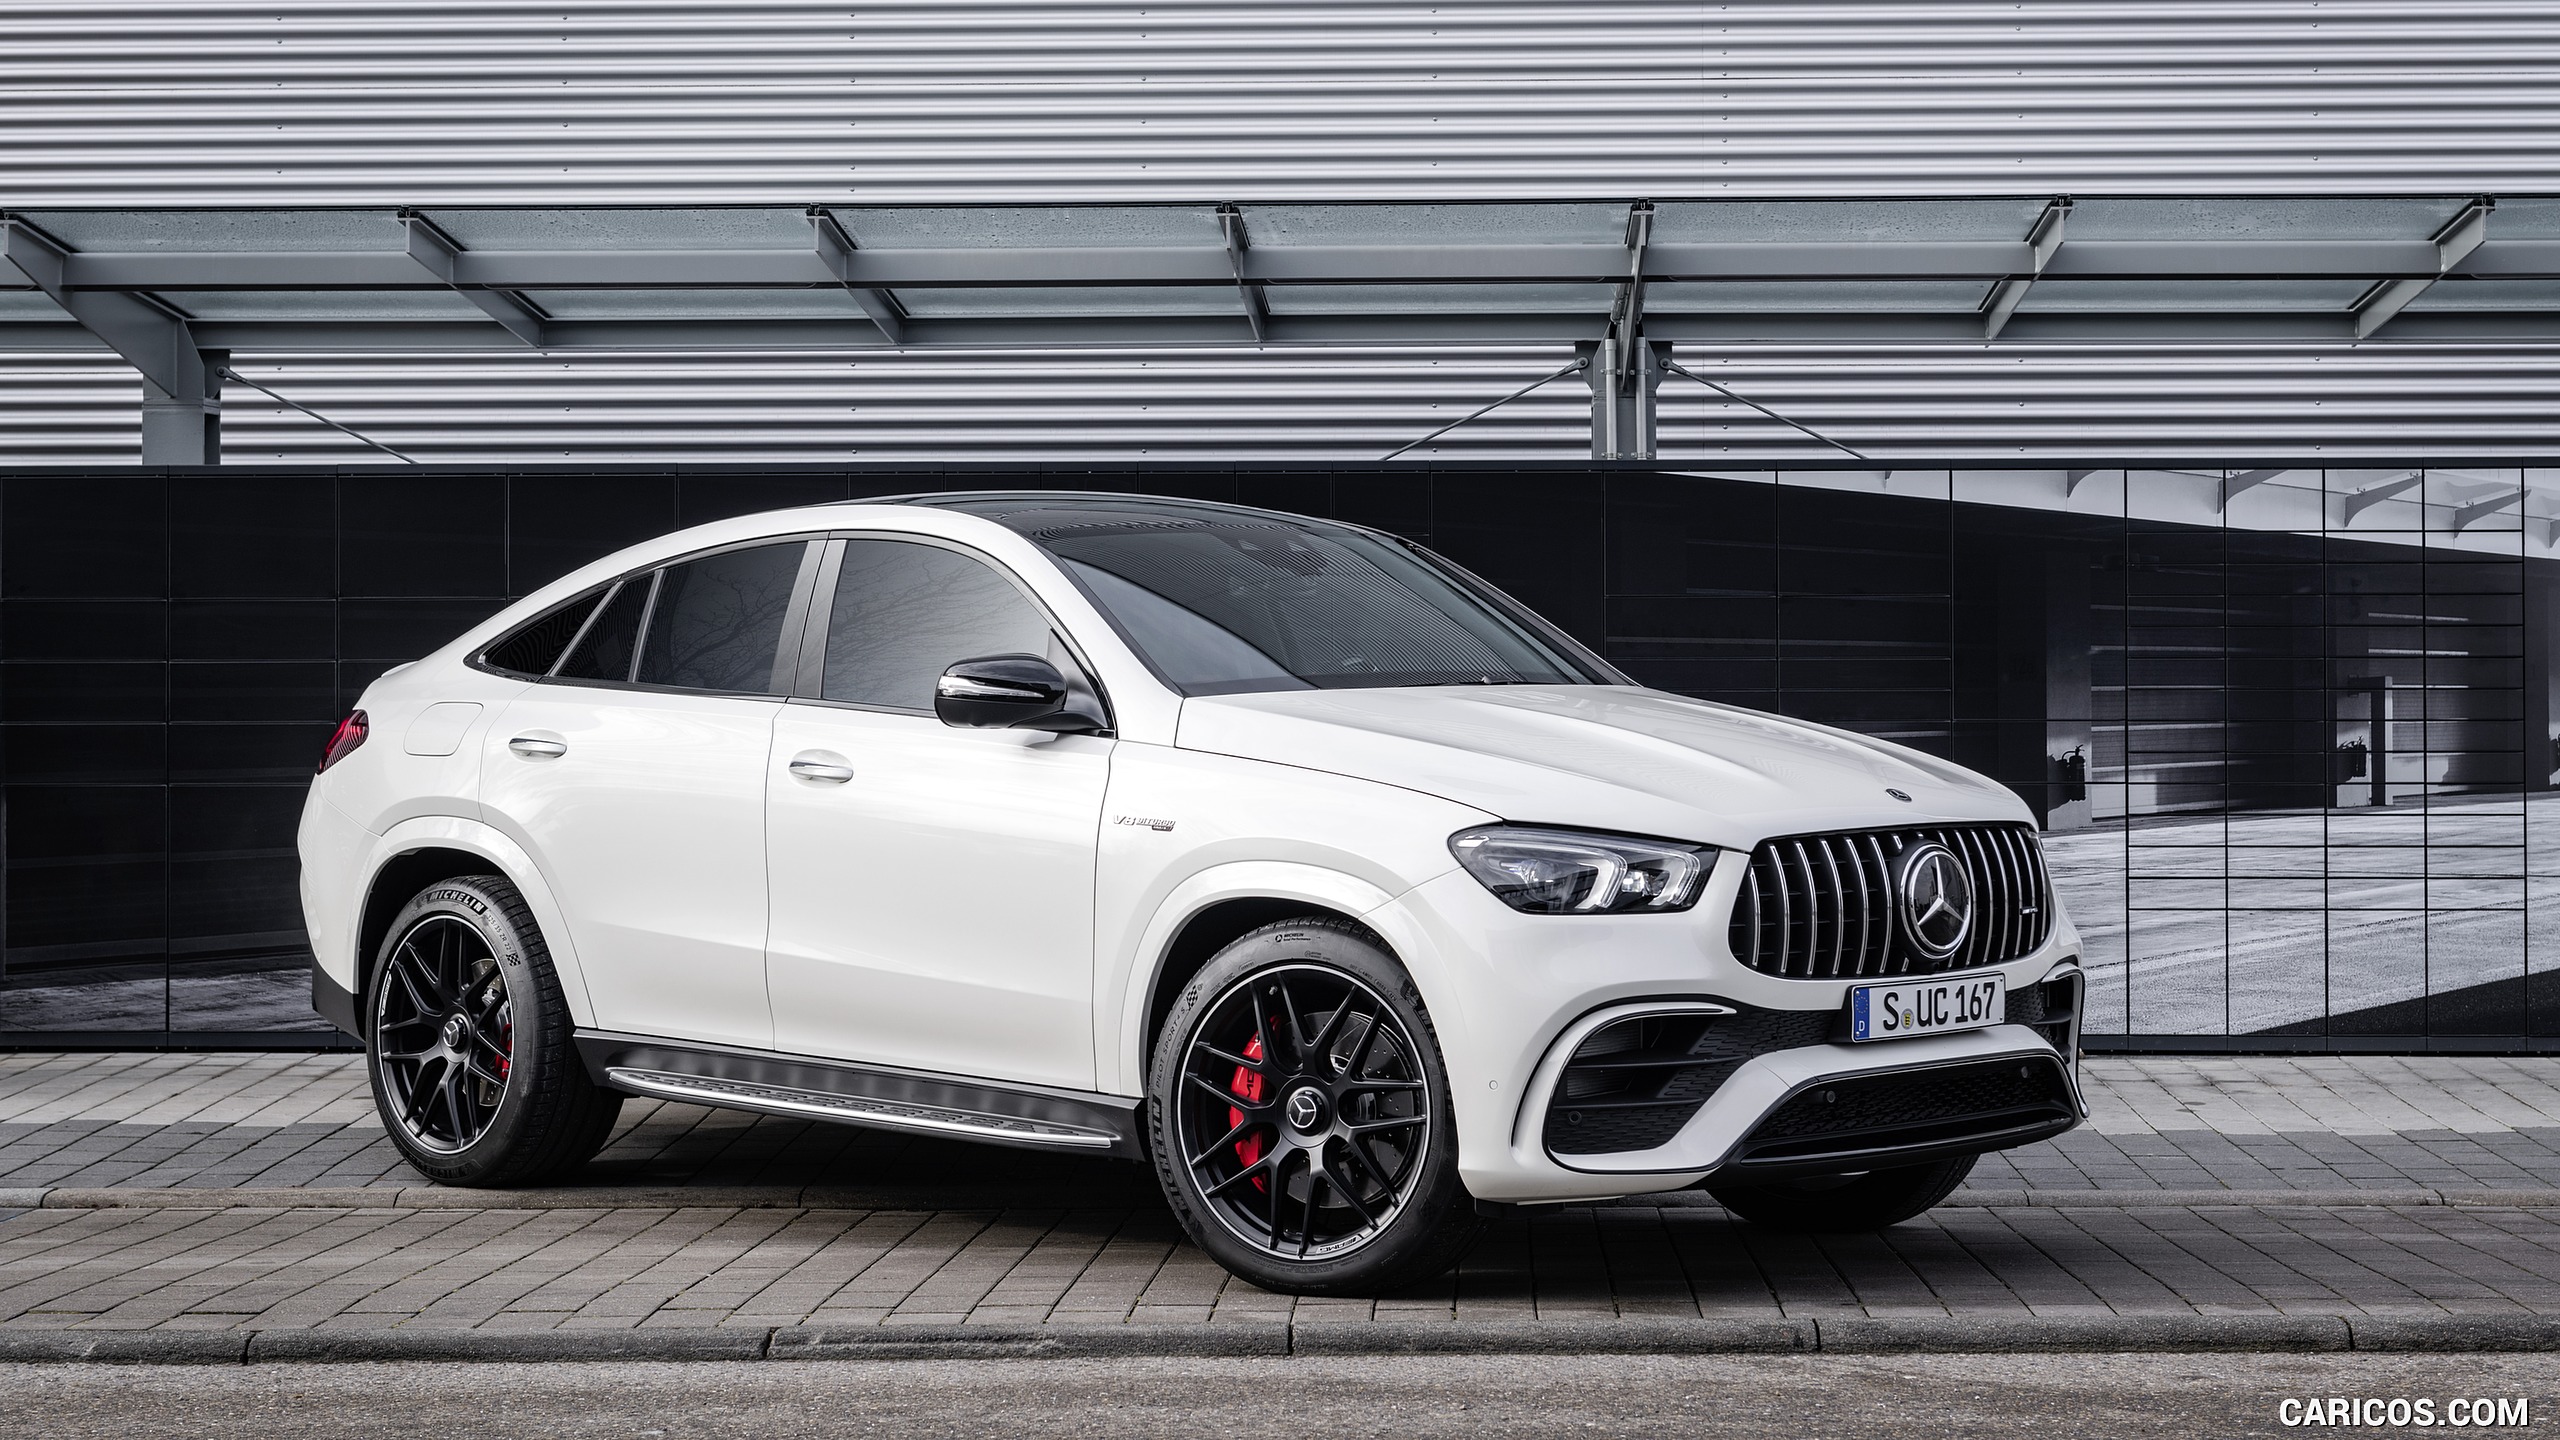 2021 Mercedes-AMG GLE 63 S 4MATIC+ Coupe (Color: Diamond White), #8 of 66